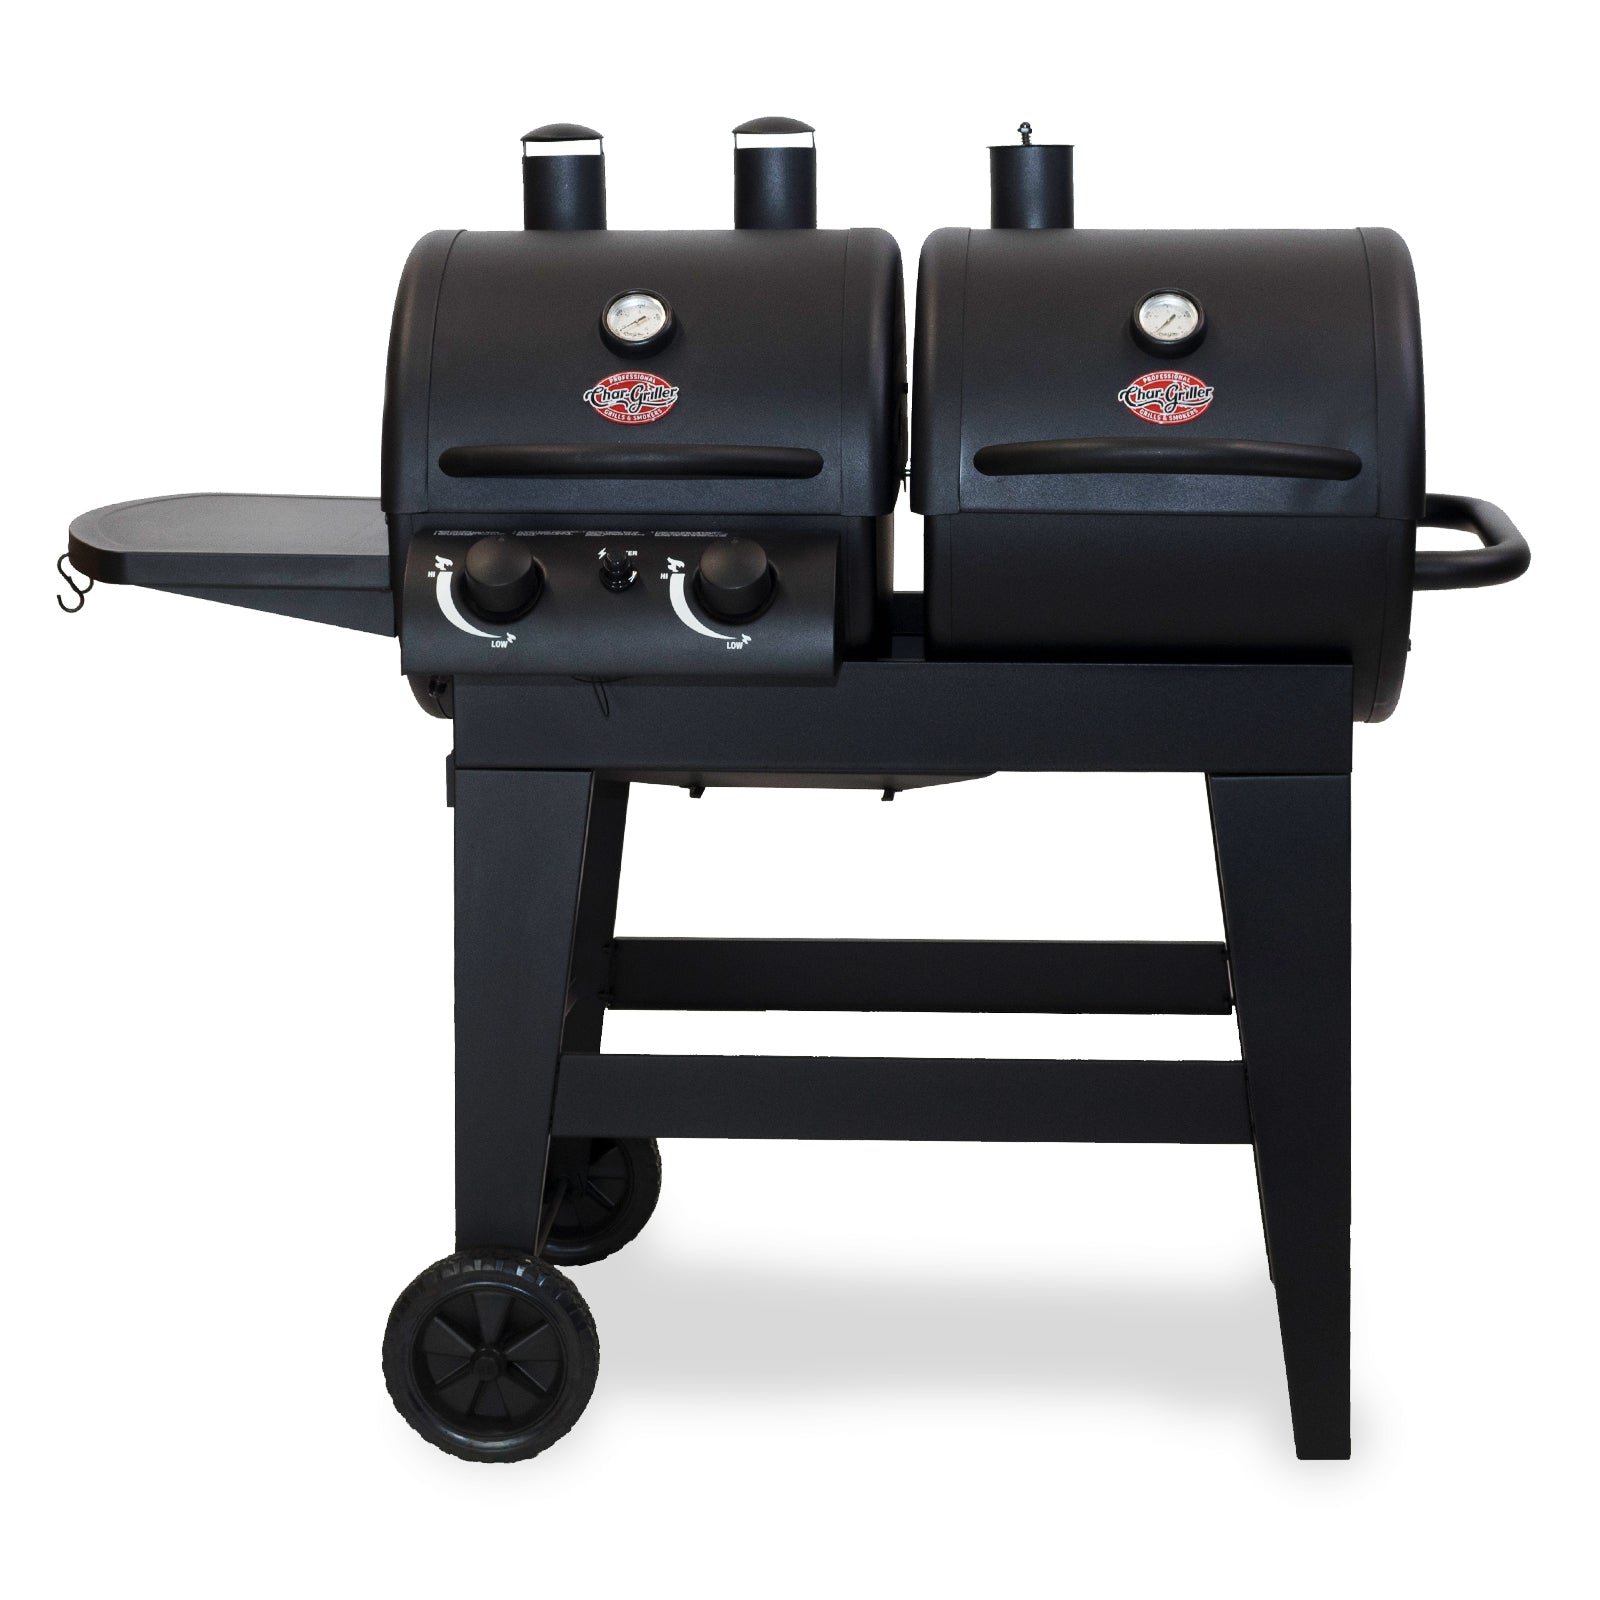 Dual Function 2-Burner Gas & Charcoal Grill - Char-Griller